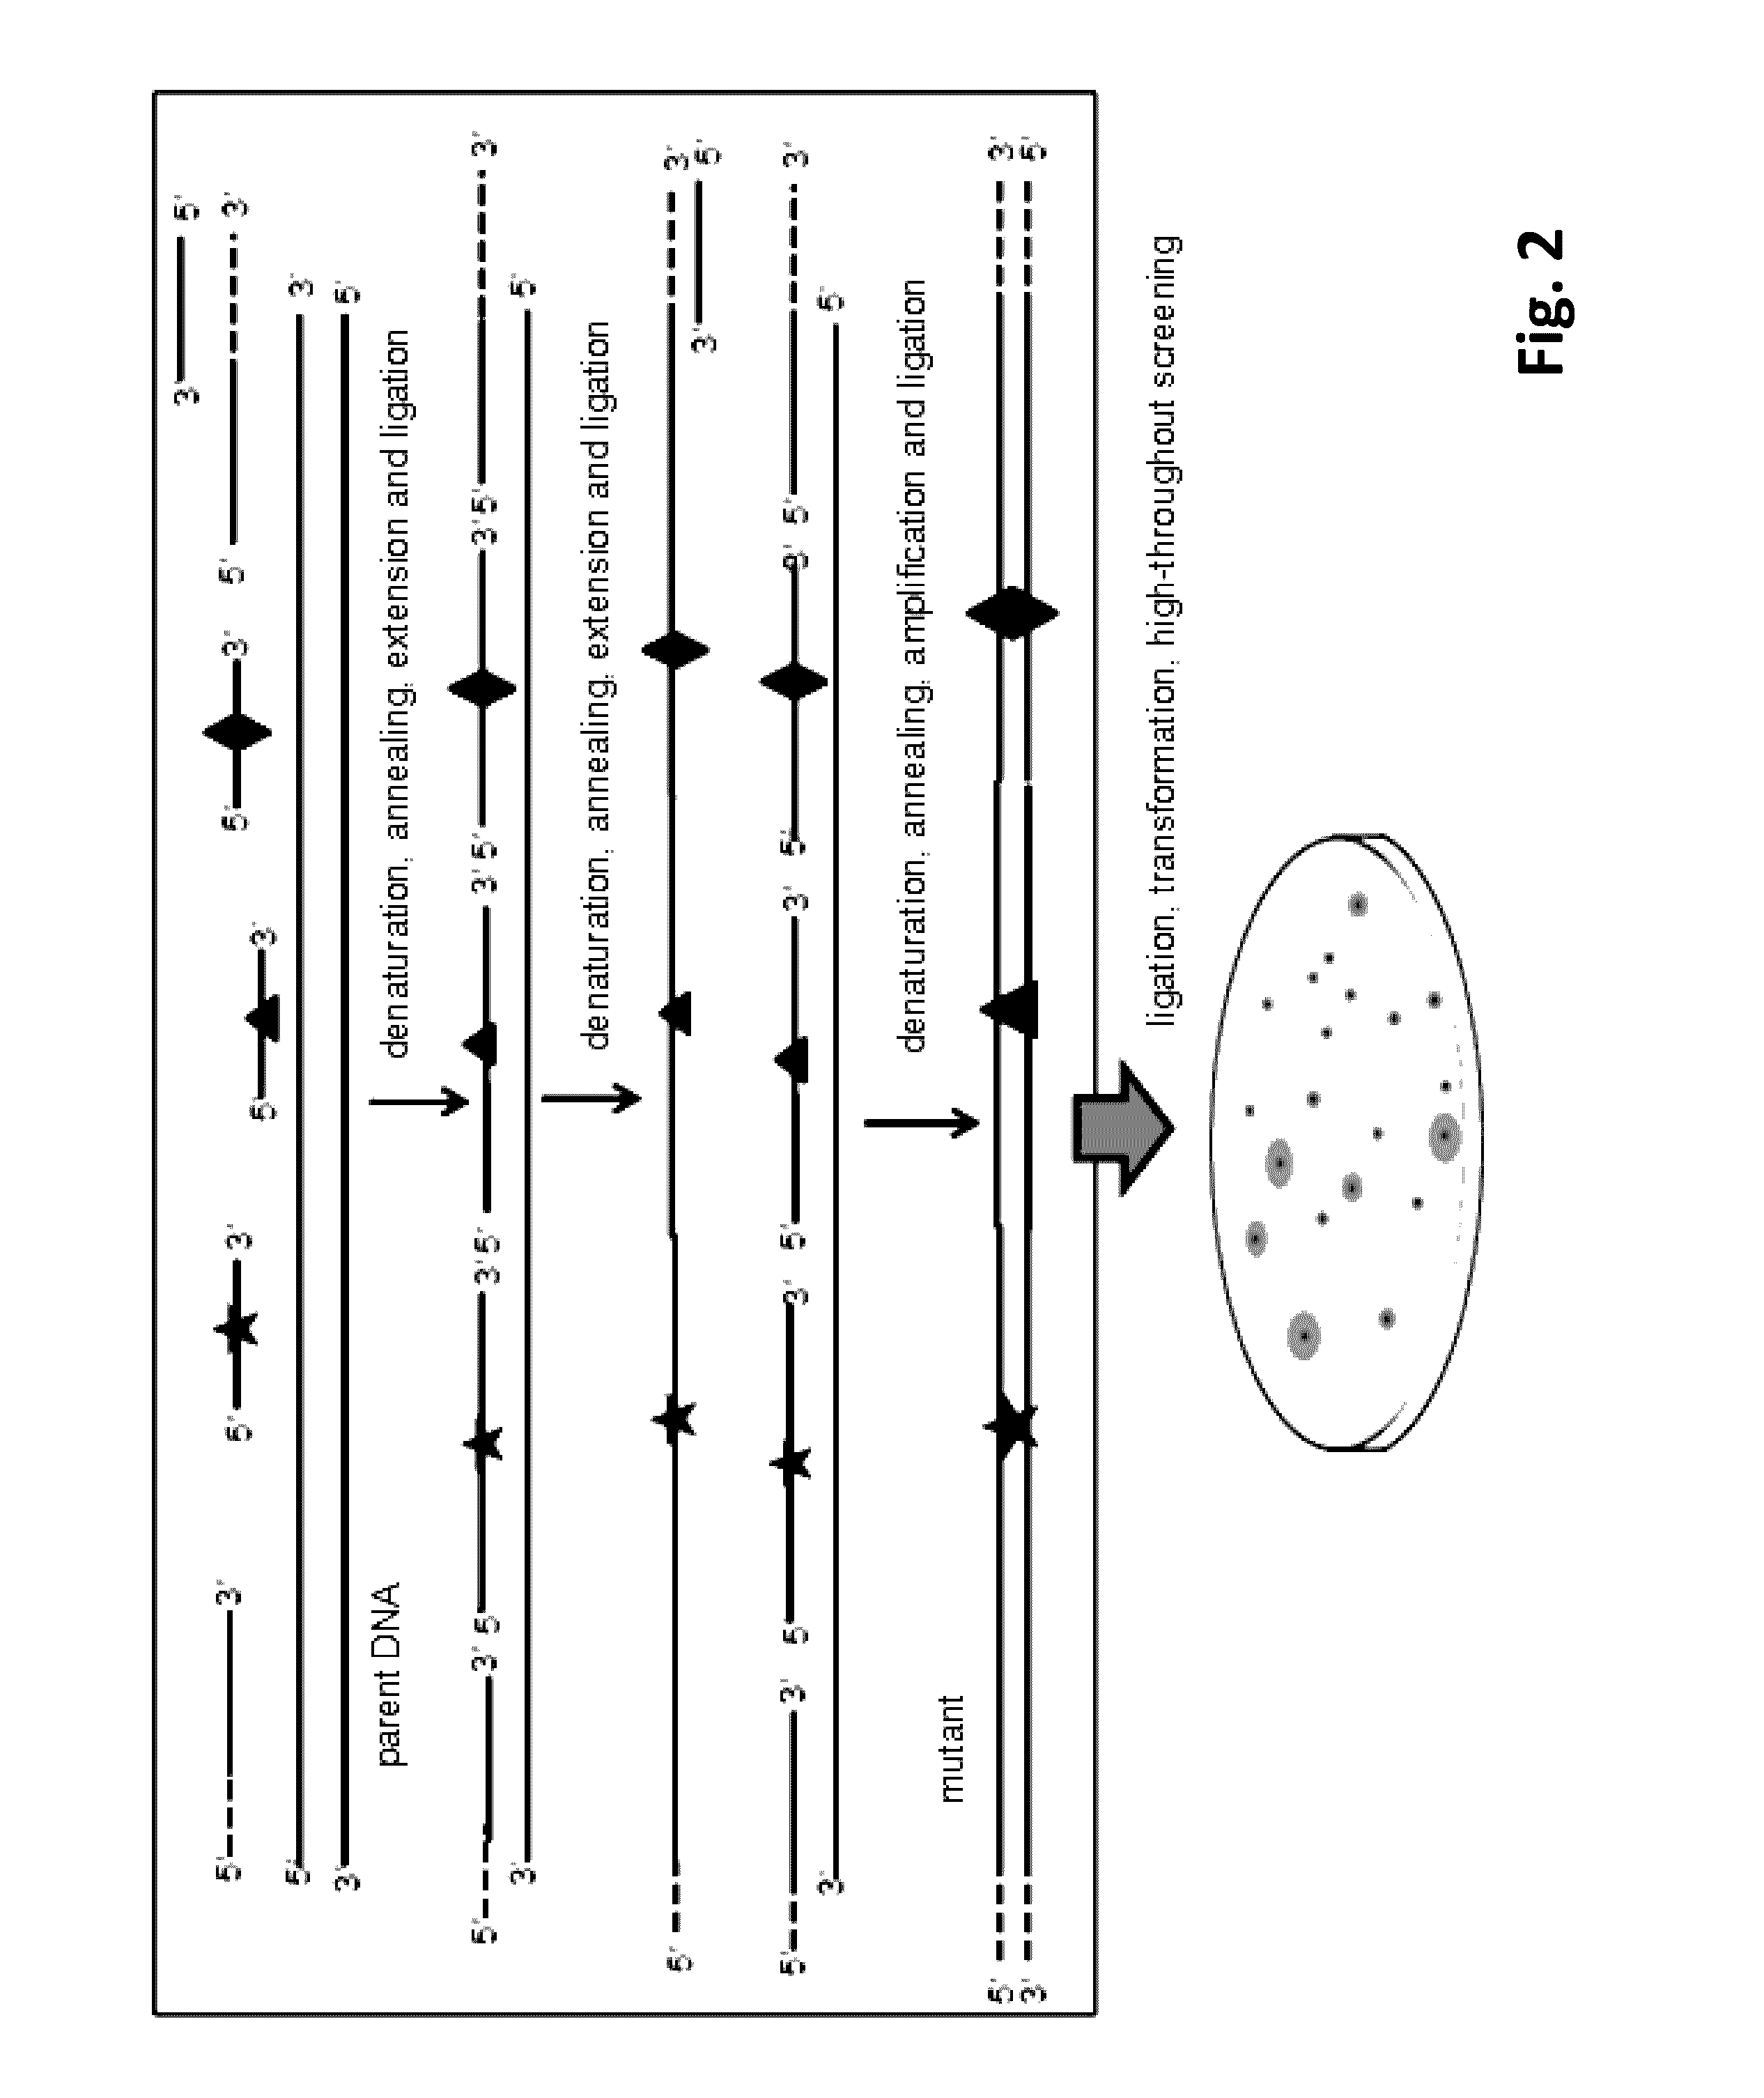 Method for Directed DNA Evolution using Combinatorial DNA Libraries